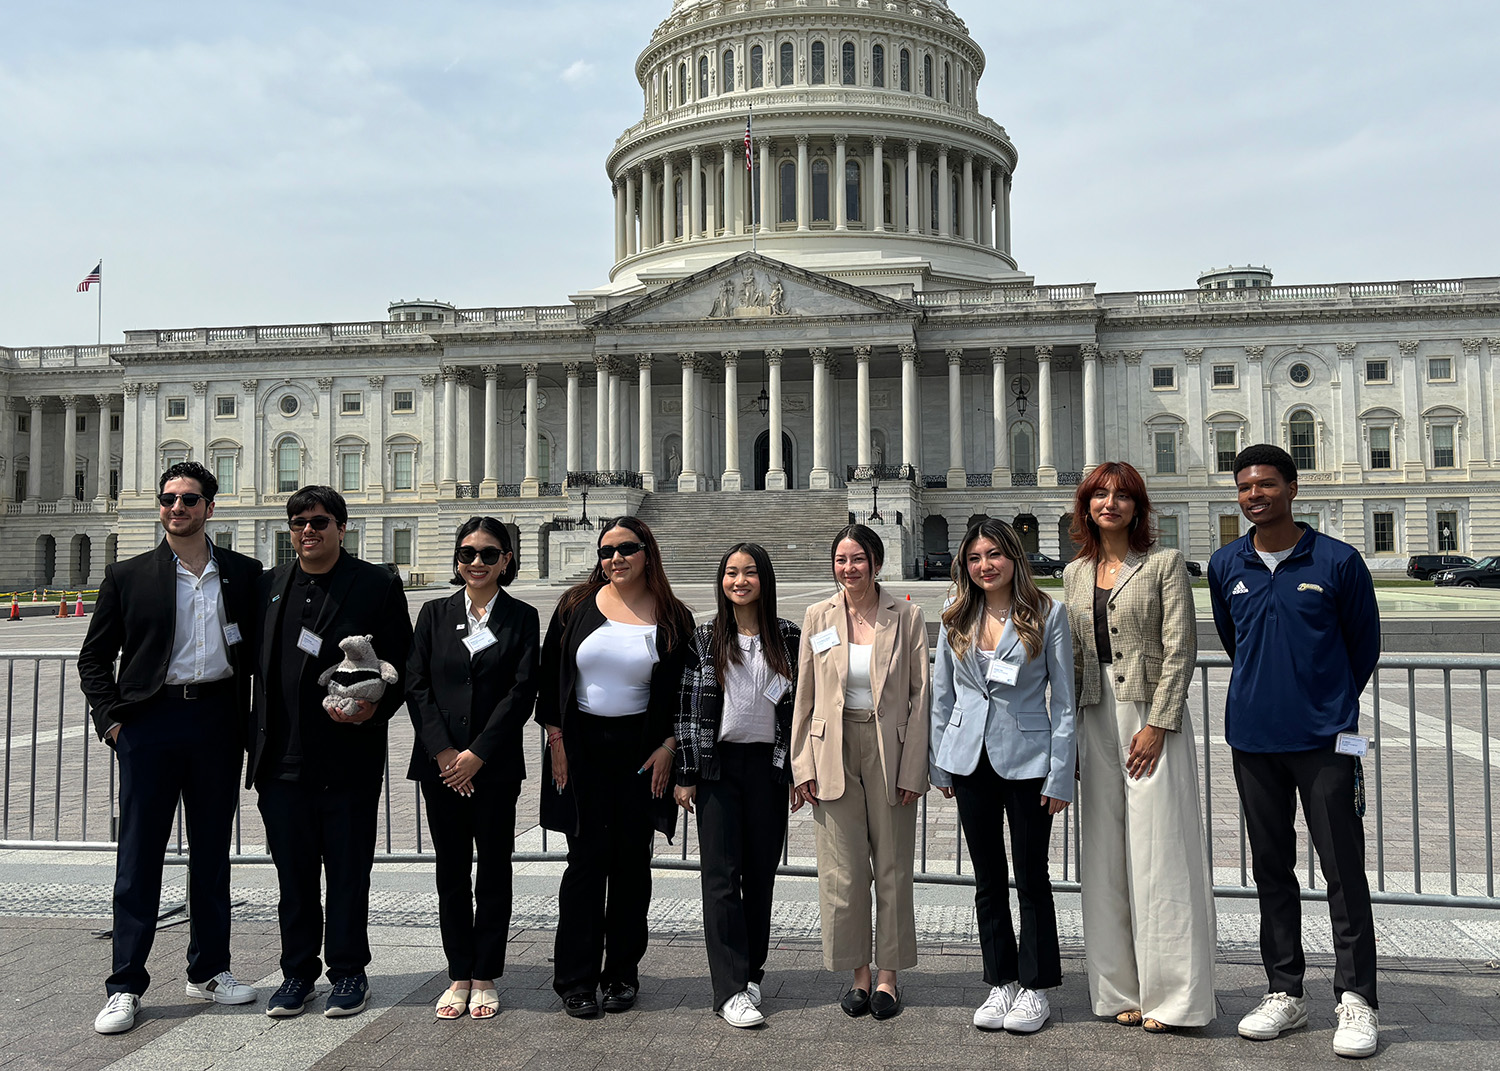 9 UC students pose in front of the U.S. Capitol building